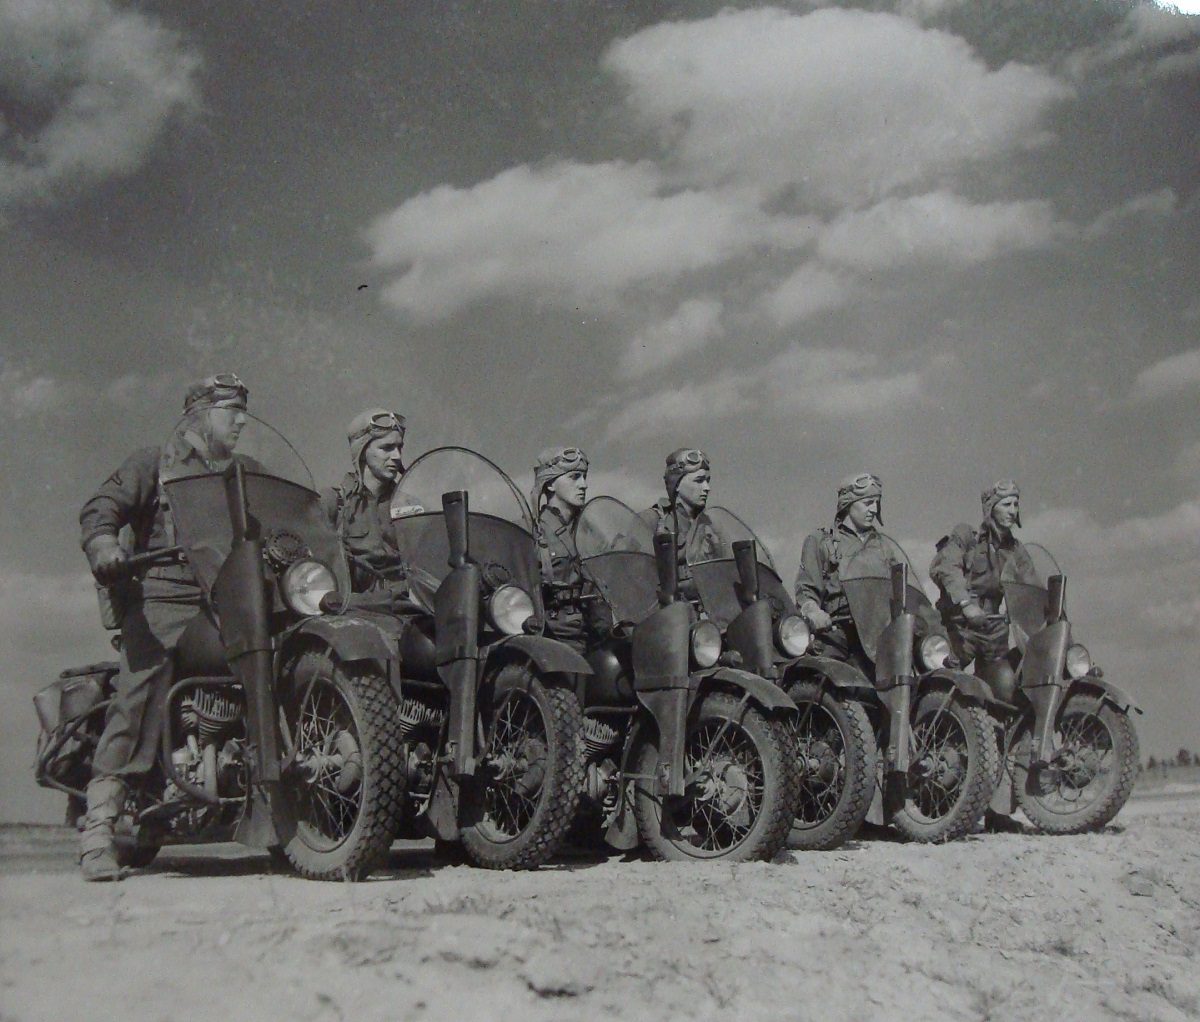 a lineup of military soldiers using the Harley Davidson WLA model